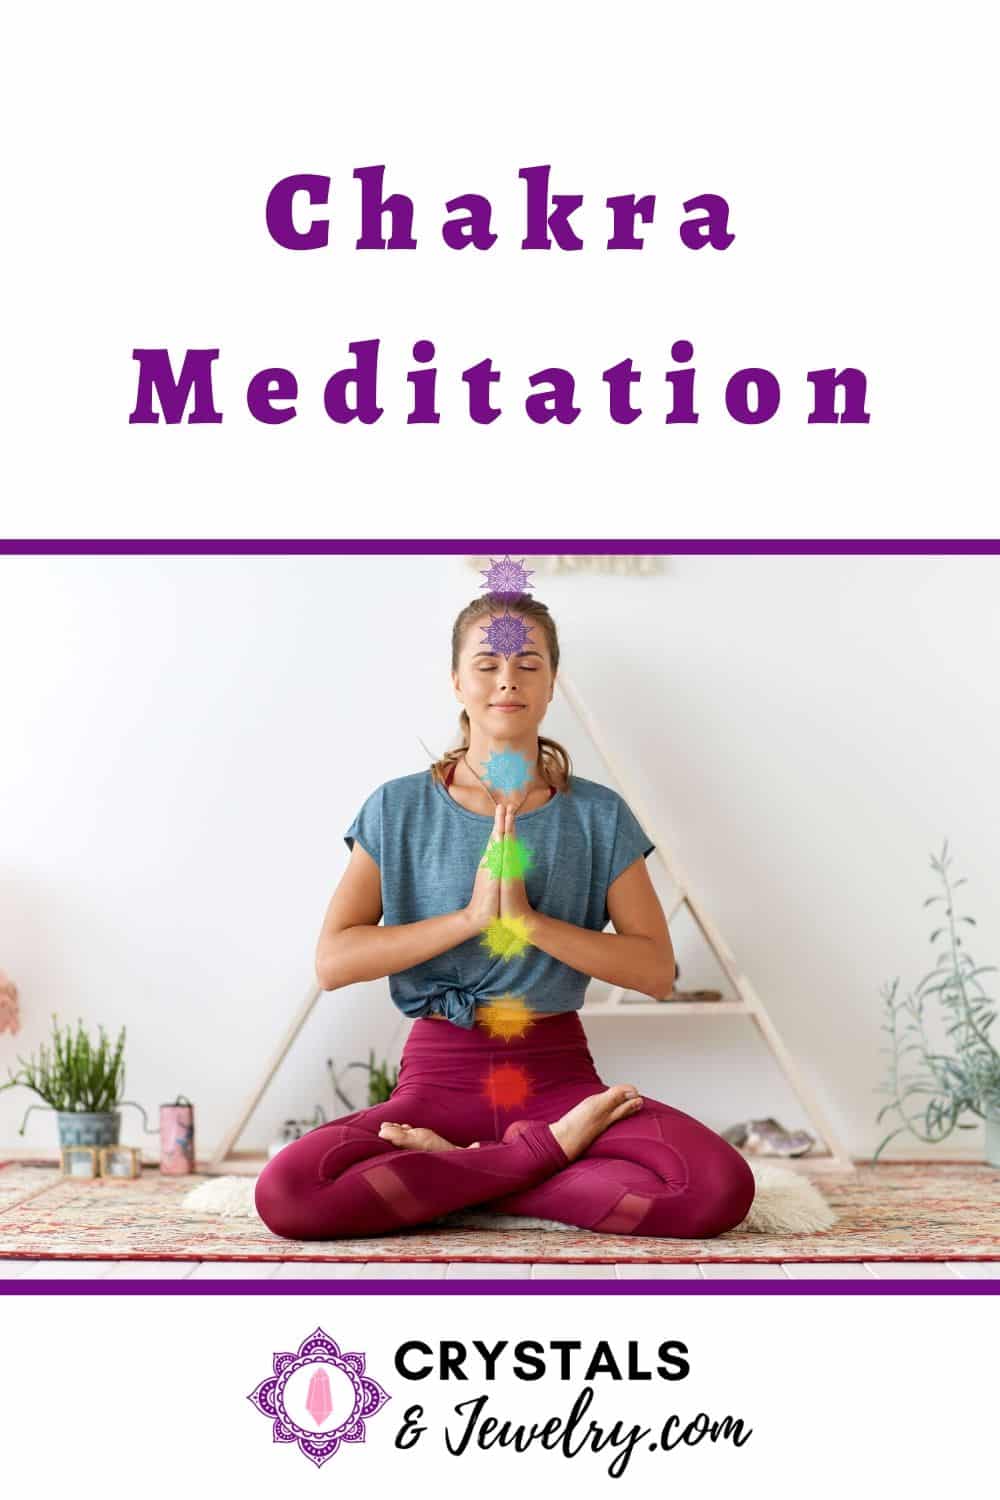 Chakra Meditation - The Complete Guide